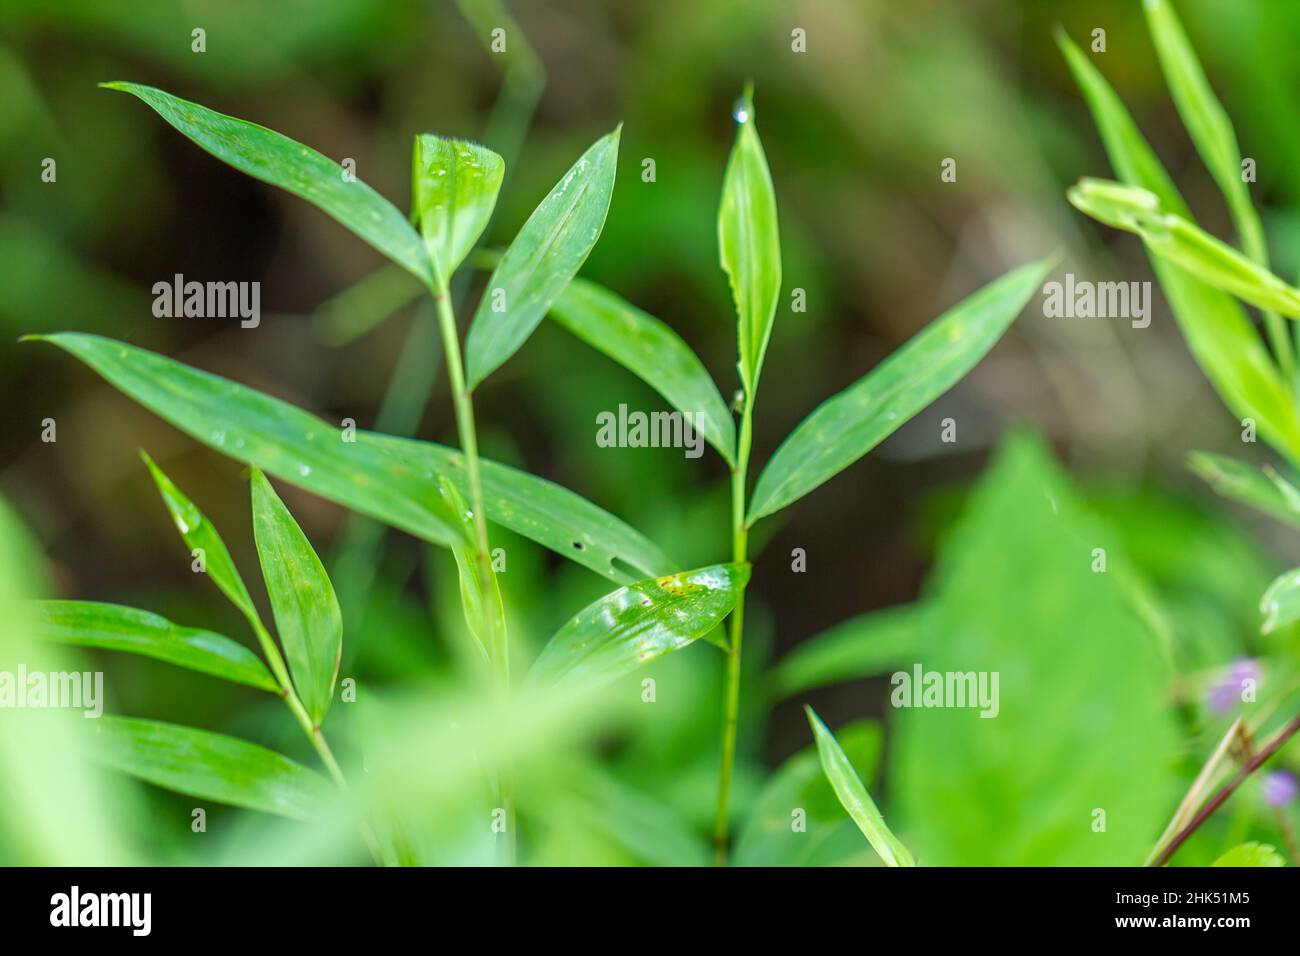 Microstegium vimineum, commonly known as Japanese stiltgrass, packing grass, or Nepalese browntop,is an annual grass that is common in a wide variety Stock Photo